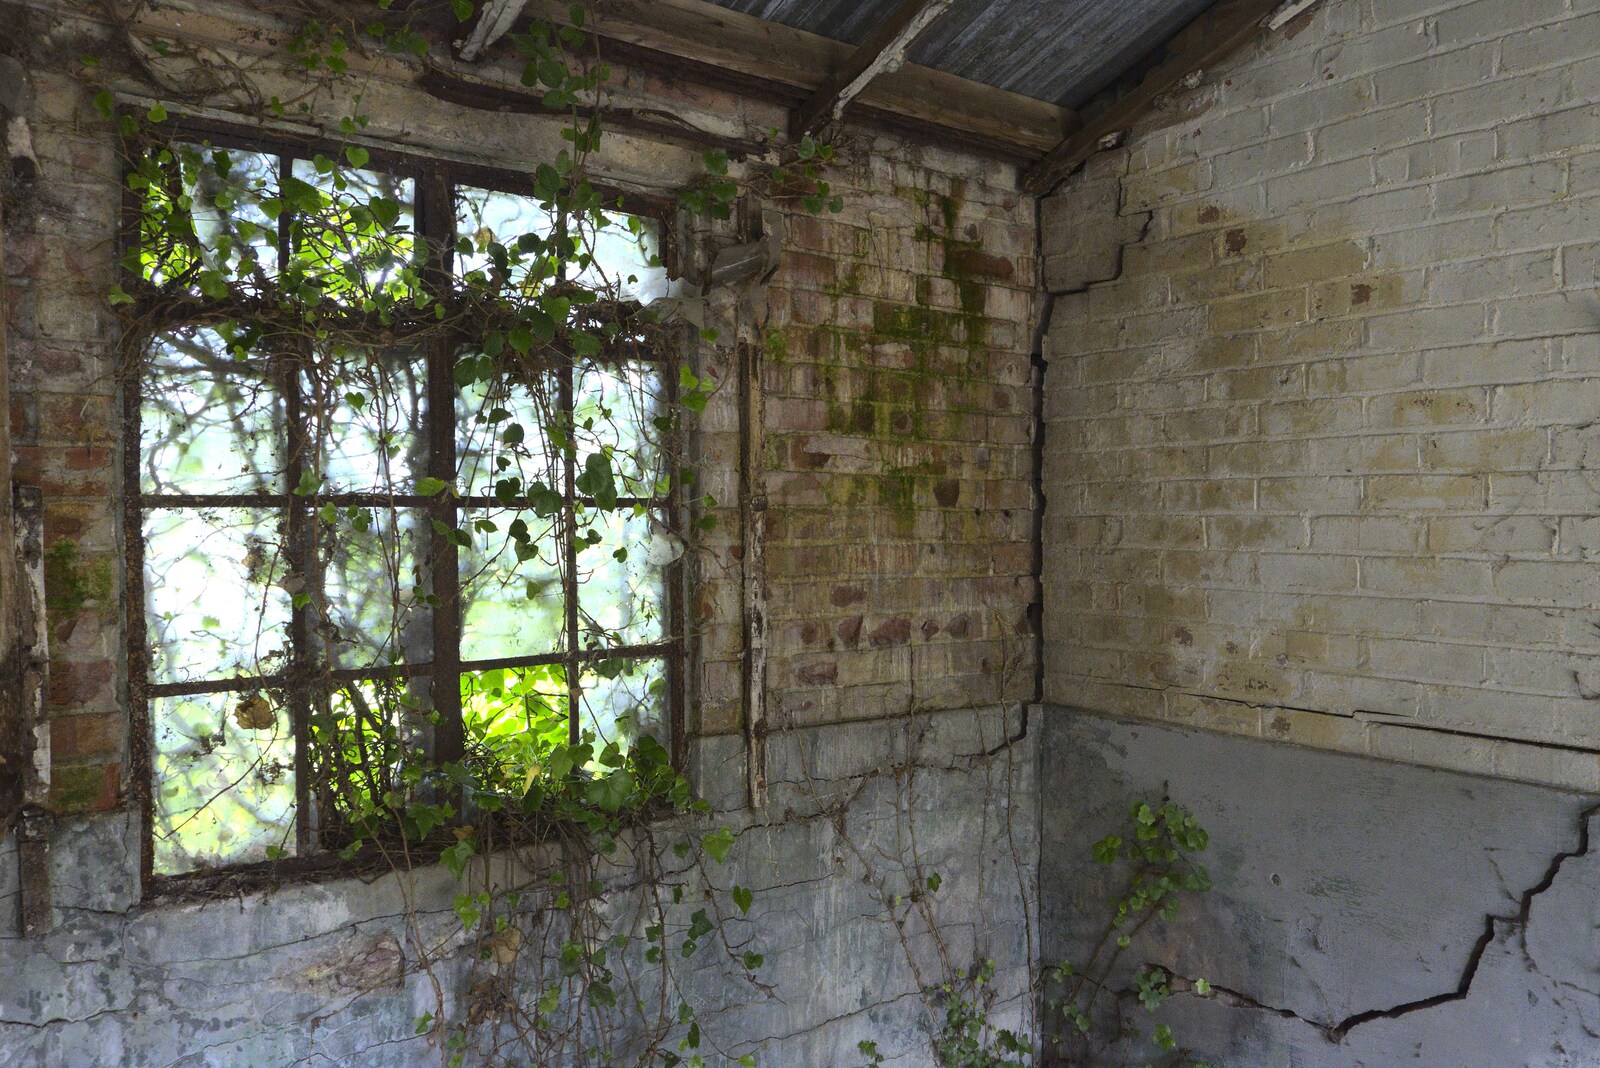 More ivy, and some major cracks from A 1940s Timewarp, Site 4, Bungay Airfield, Flixton, Suffolk - 9th June 2022